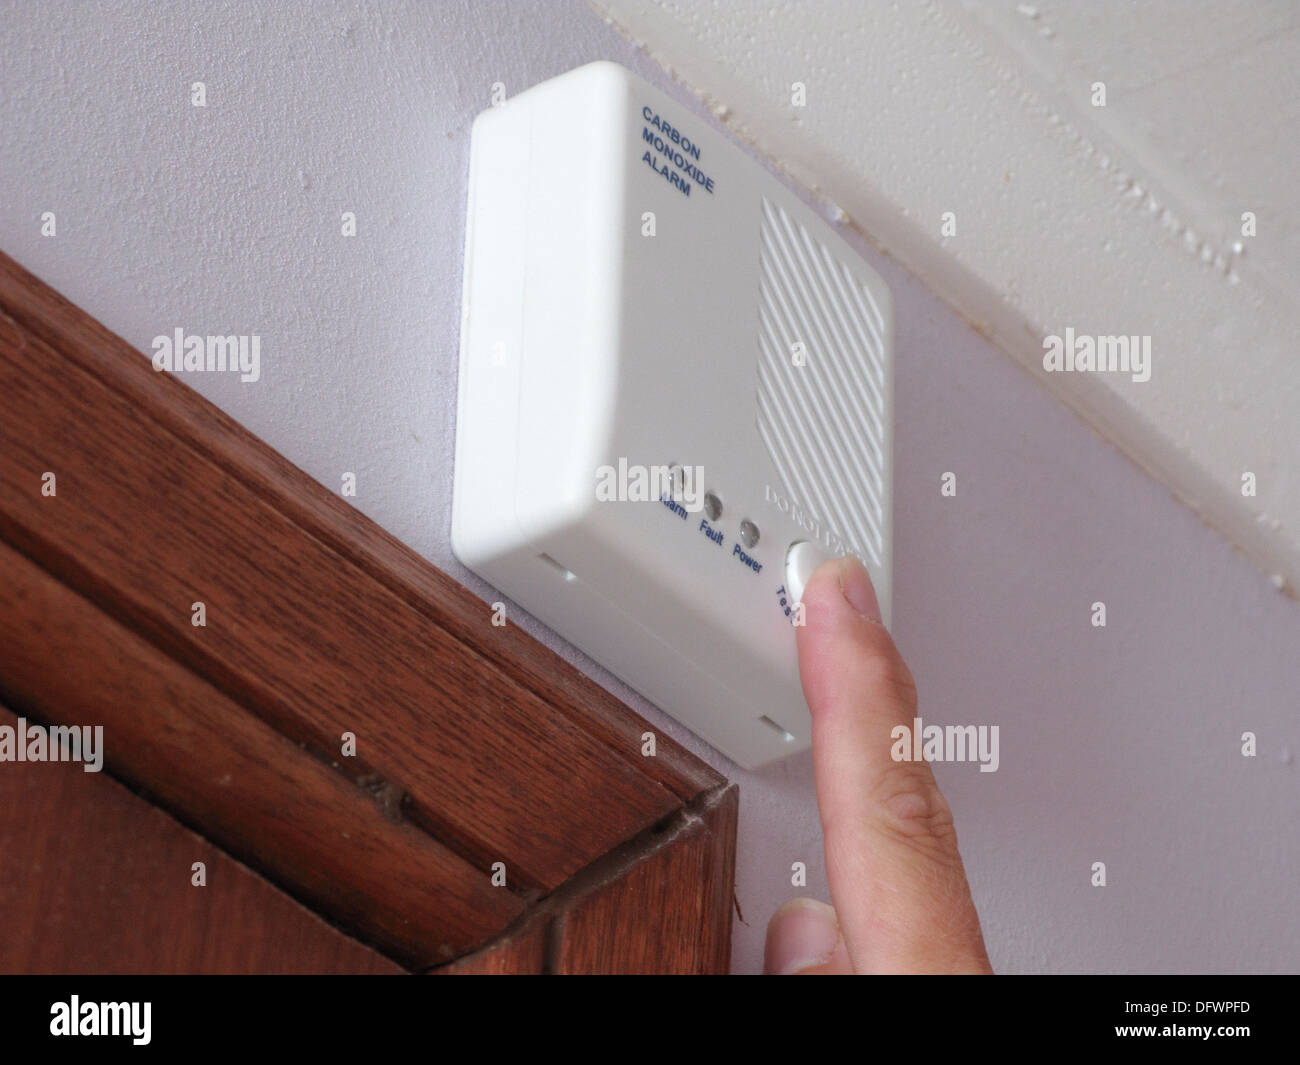 Caucasian Man Testing a Carbon Monoxide Monitor Alarm in a Home Setting, UK MODEL RELEASED Stock Photo